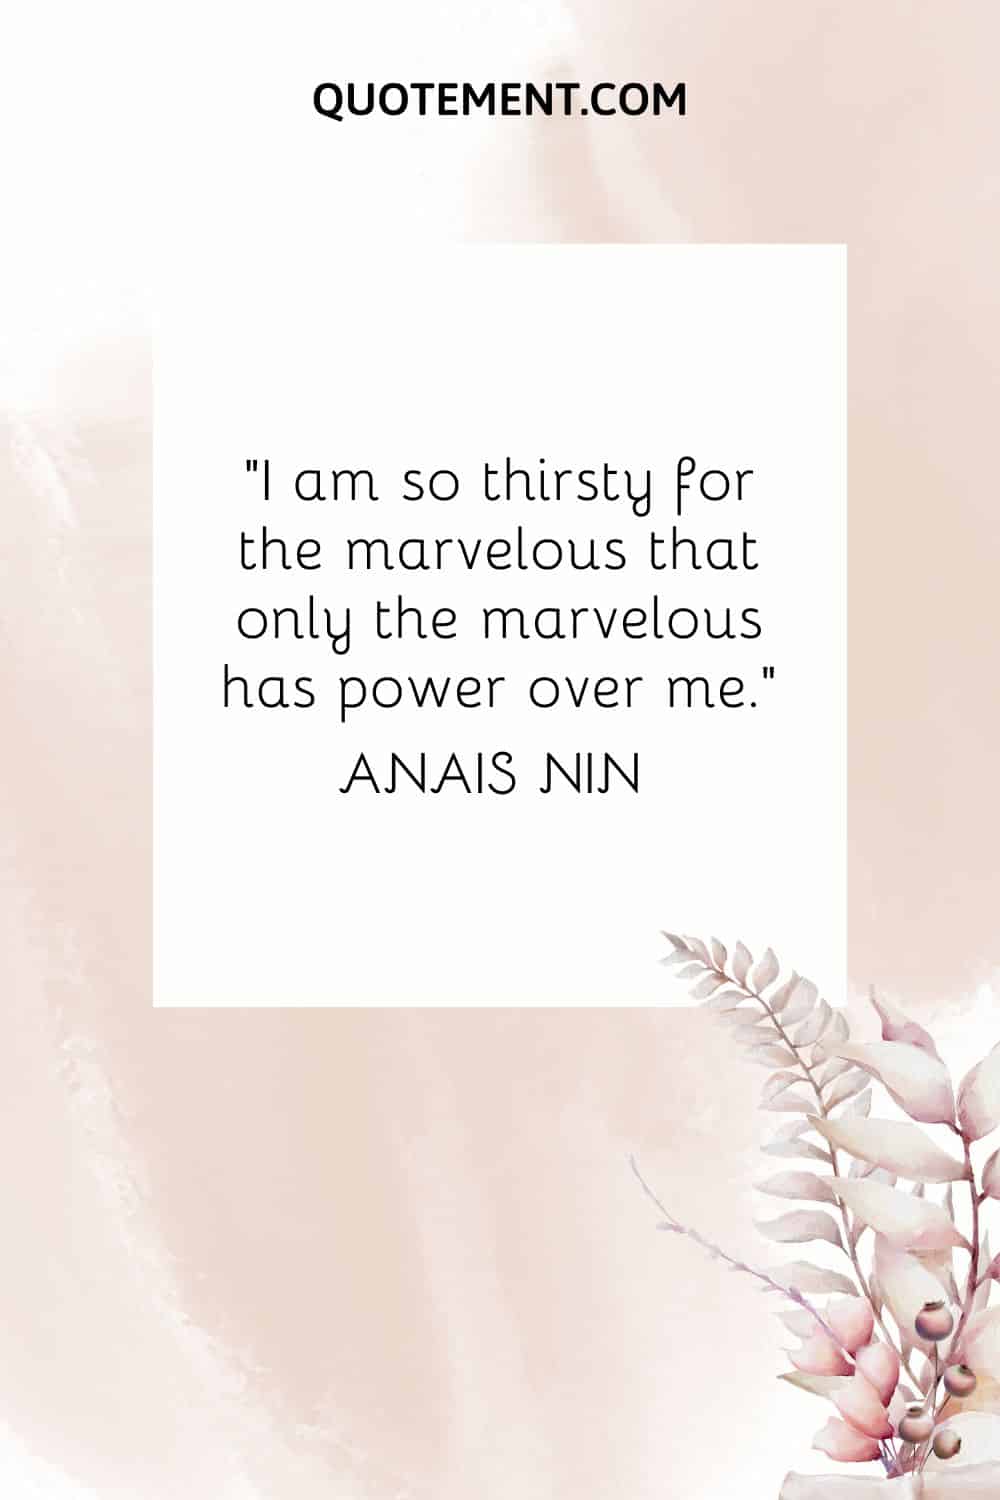 I am so thirsty for the marvelous that only the marvelous has power over me. — Anais Nin